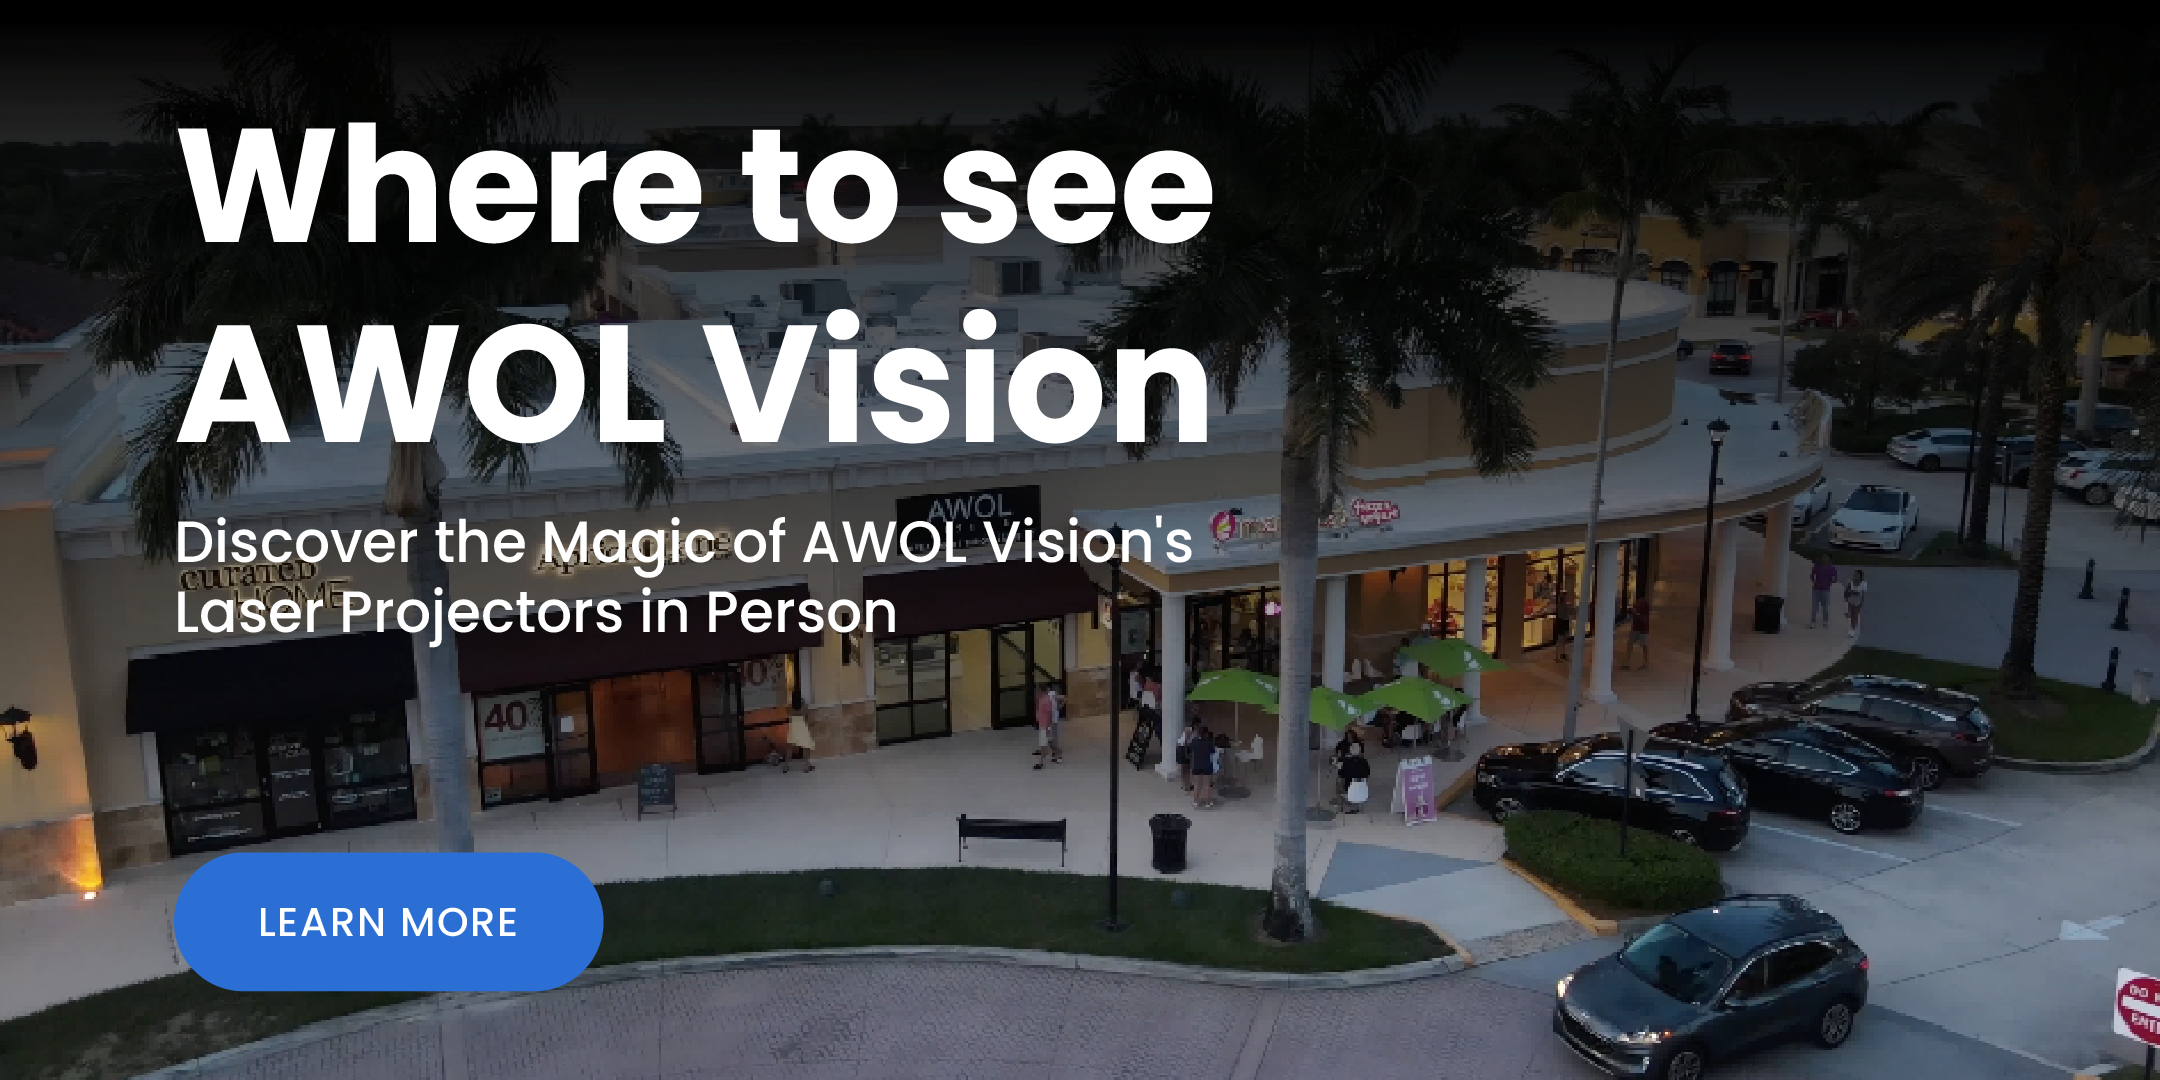 Where to see AWOL Vision